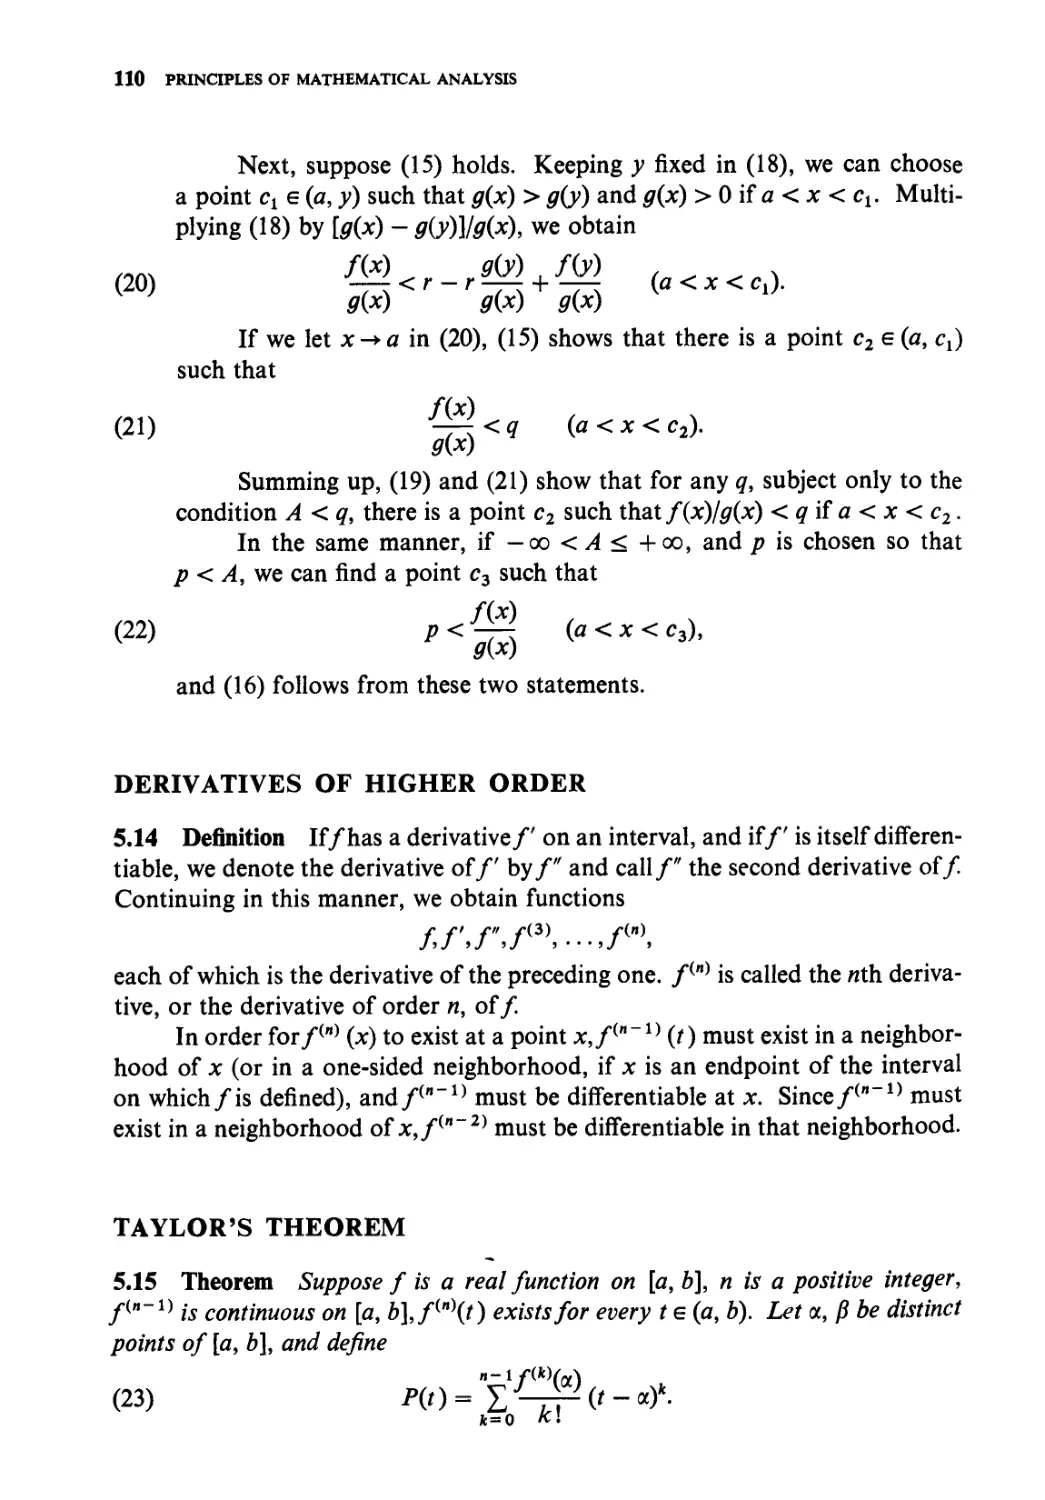 Derivatives of higher order
Taylor's theorem